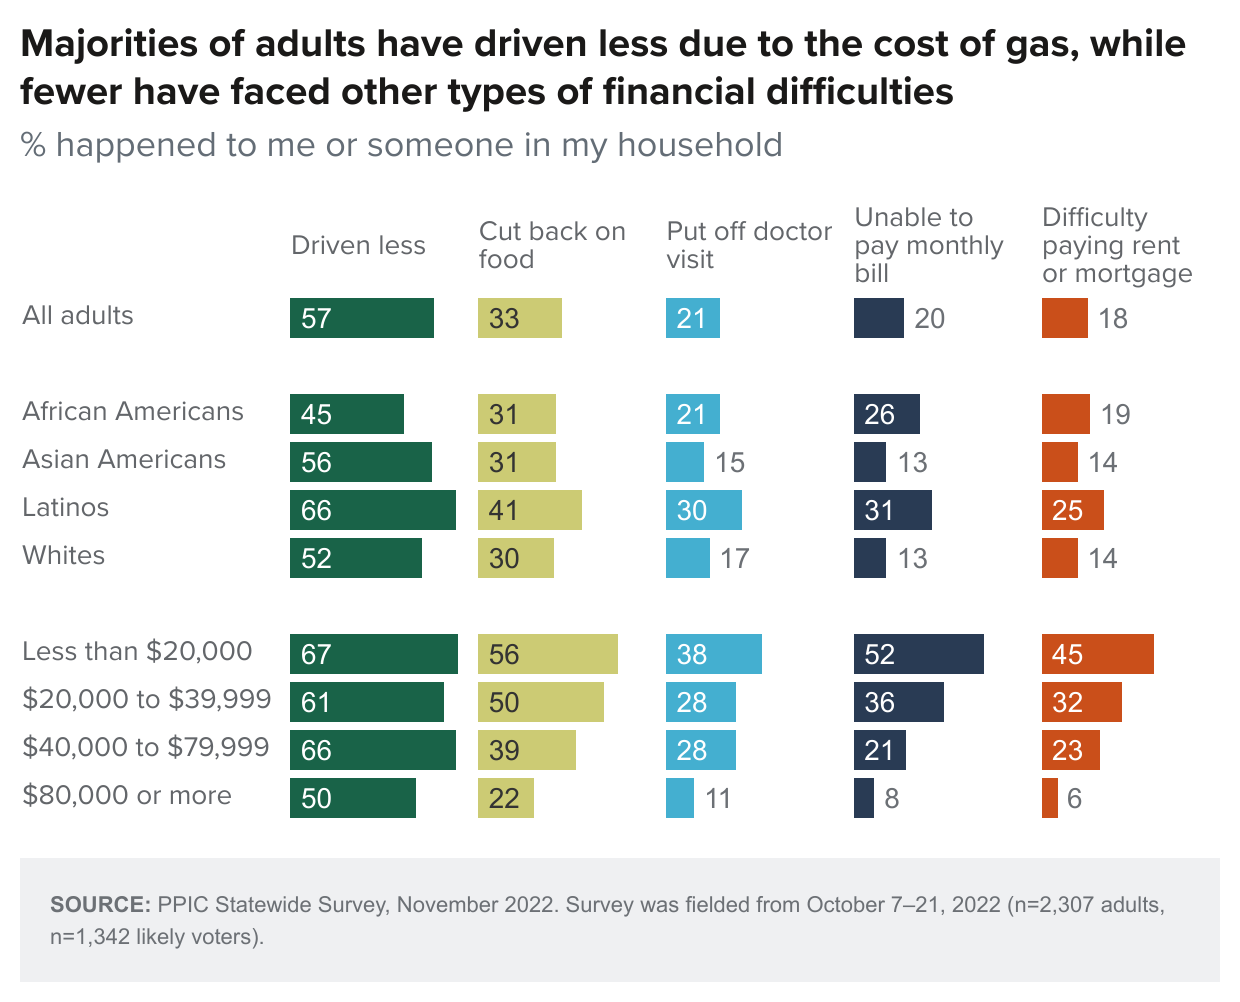 figure - Majorities of adults have driven less due to the cost of gas, while fewer have faced other types of financial difficulties